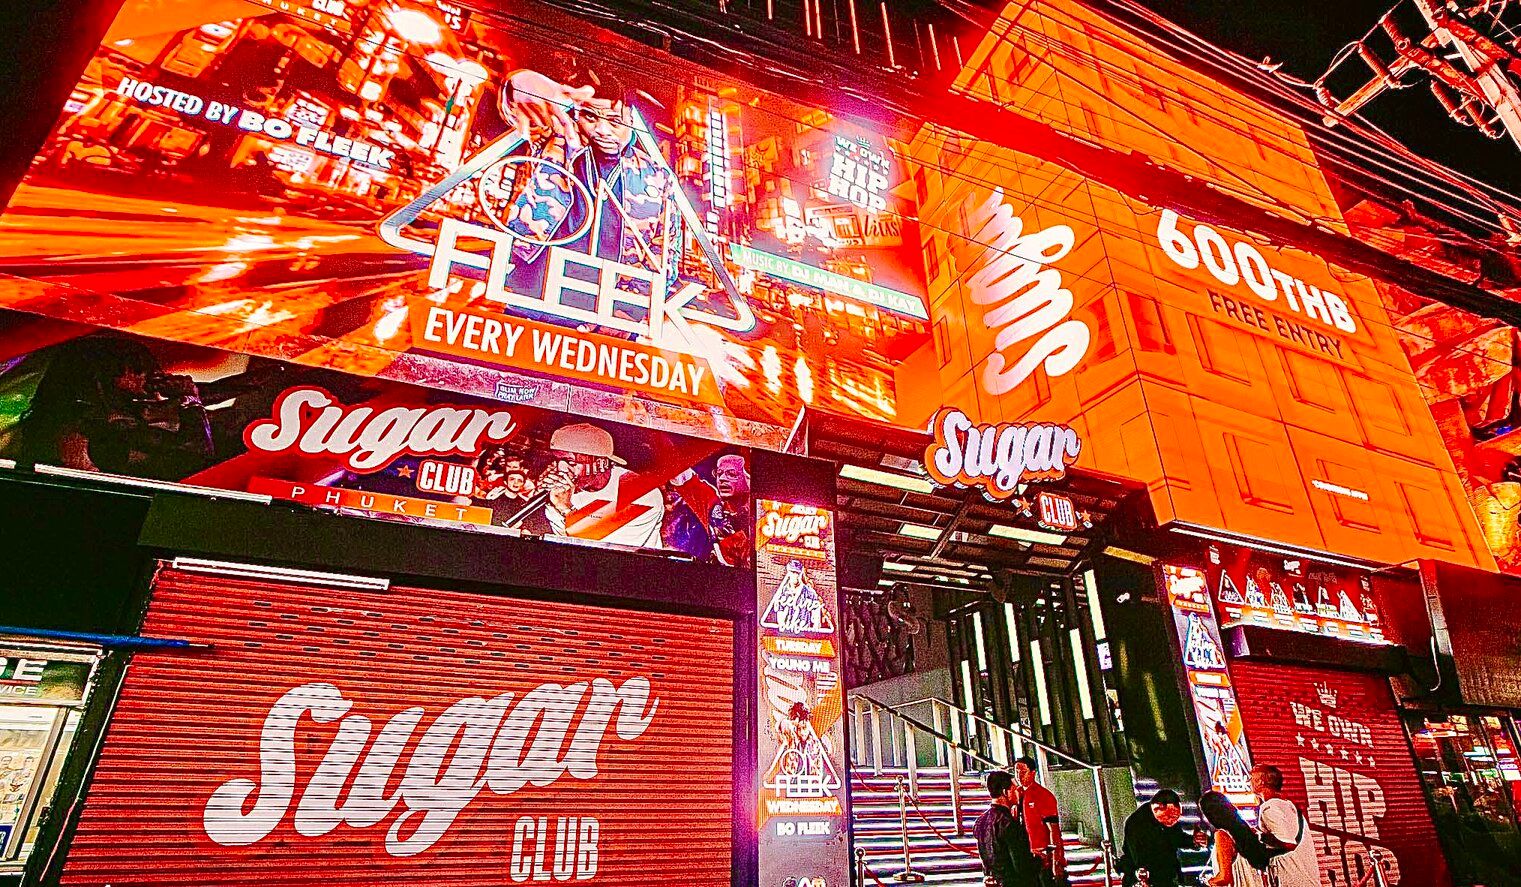 The vibrant LED screens of Sugar Club Phuket will immediately catch your eye.